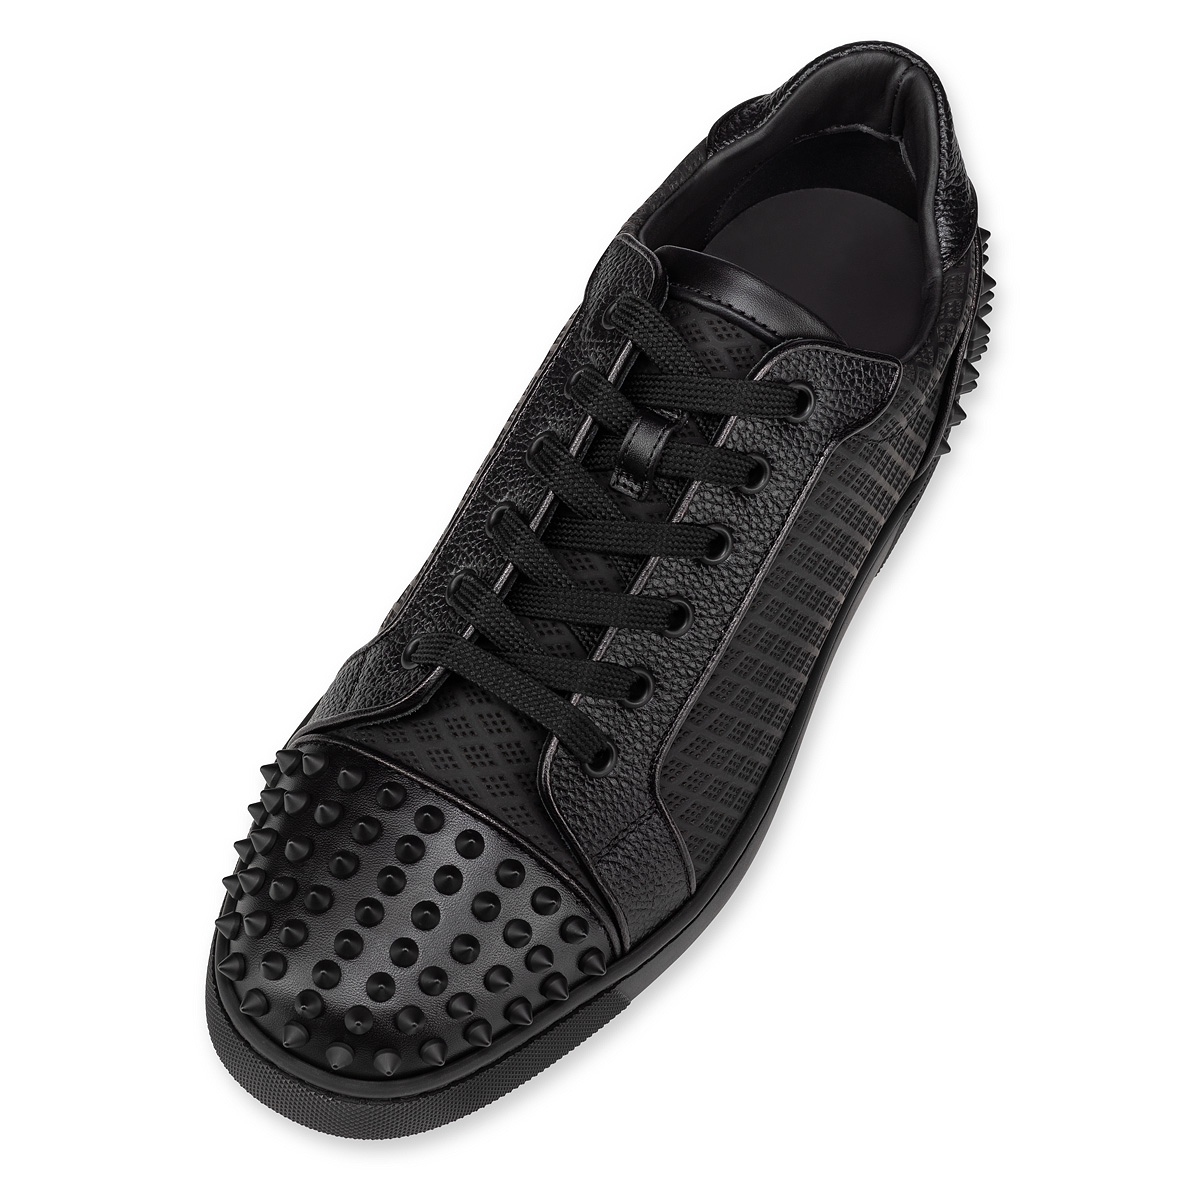 Christian Louboutin Seavaste 2 Spiked Leather Low-top Trainers in